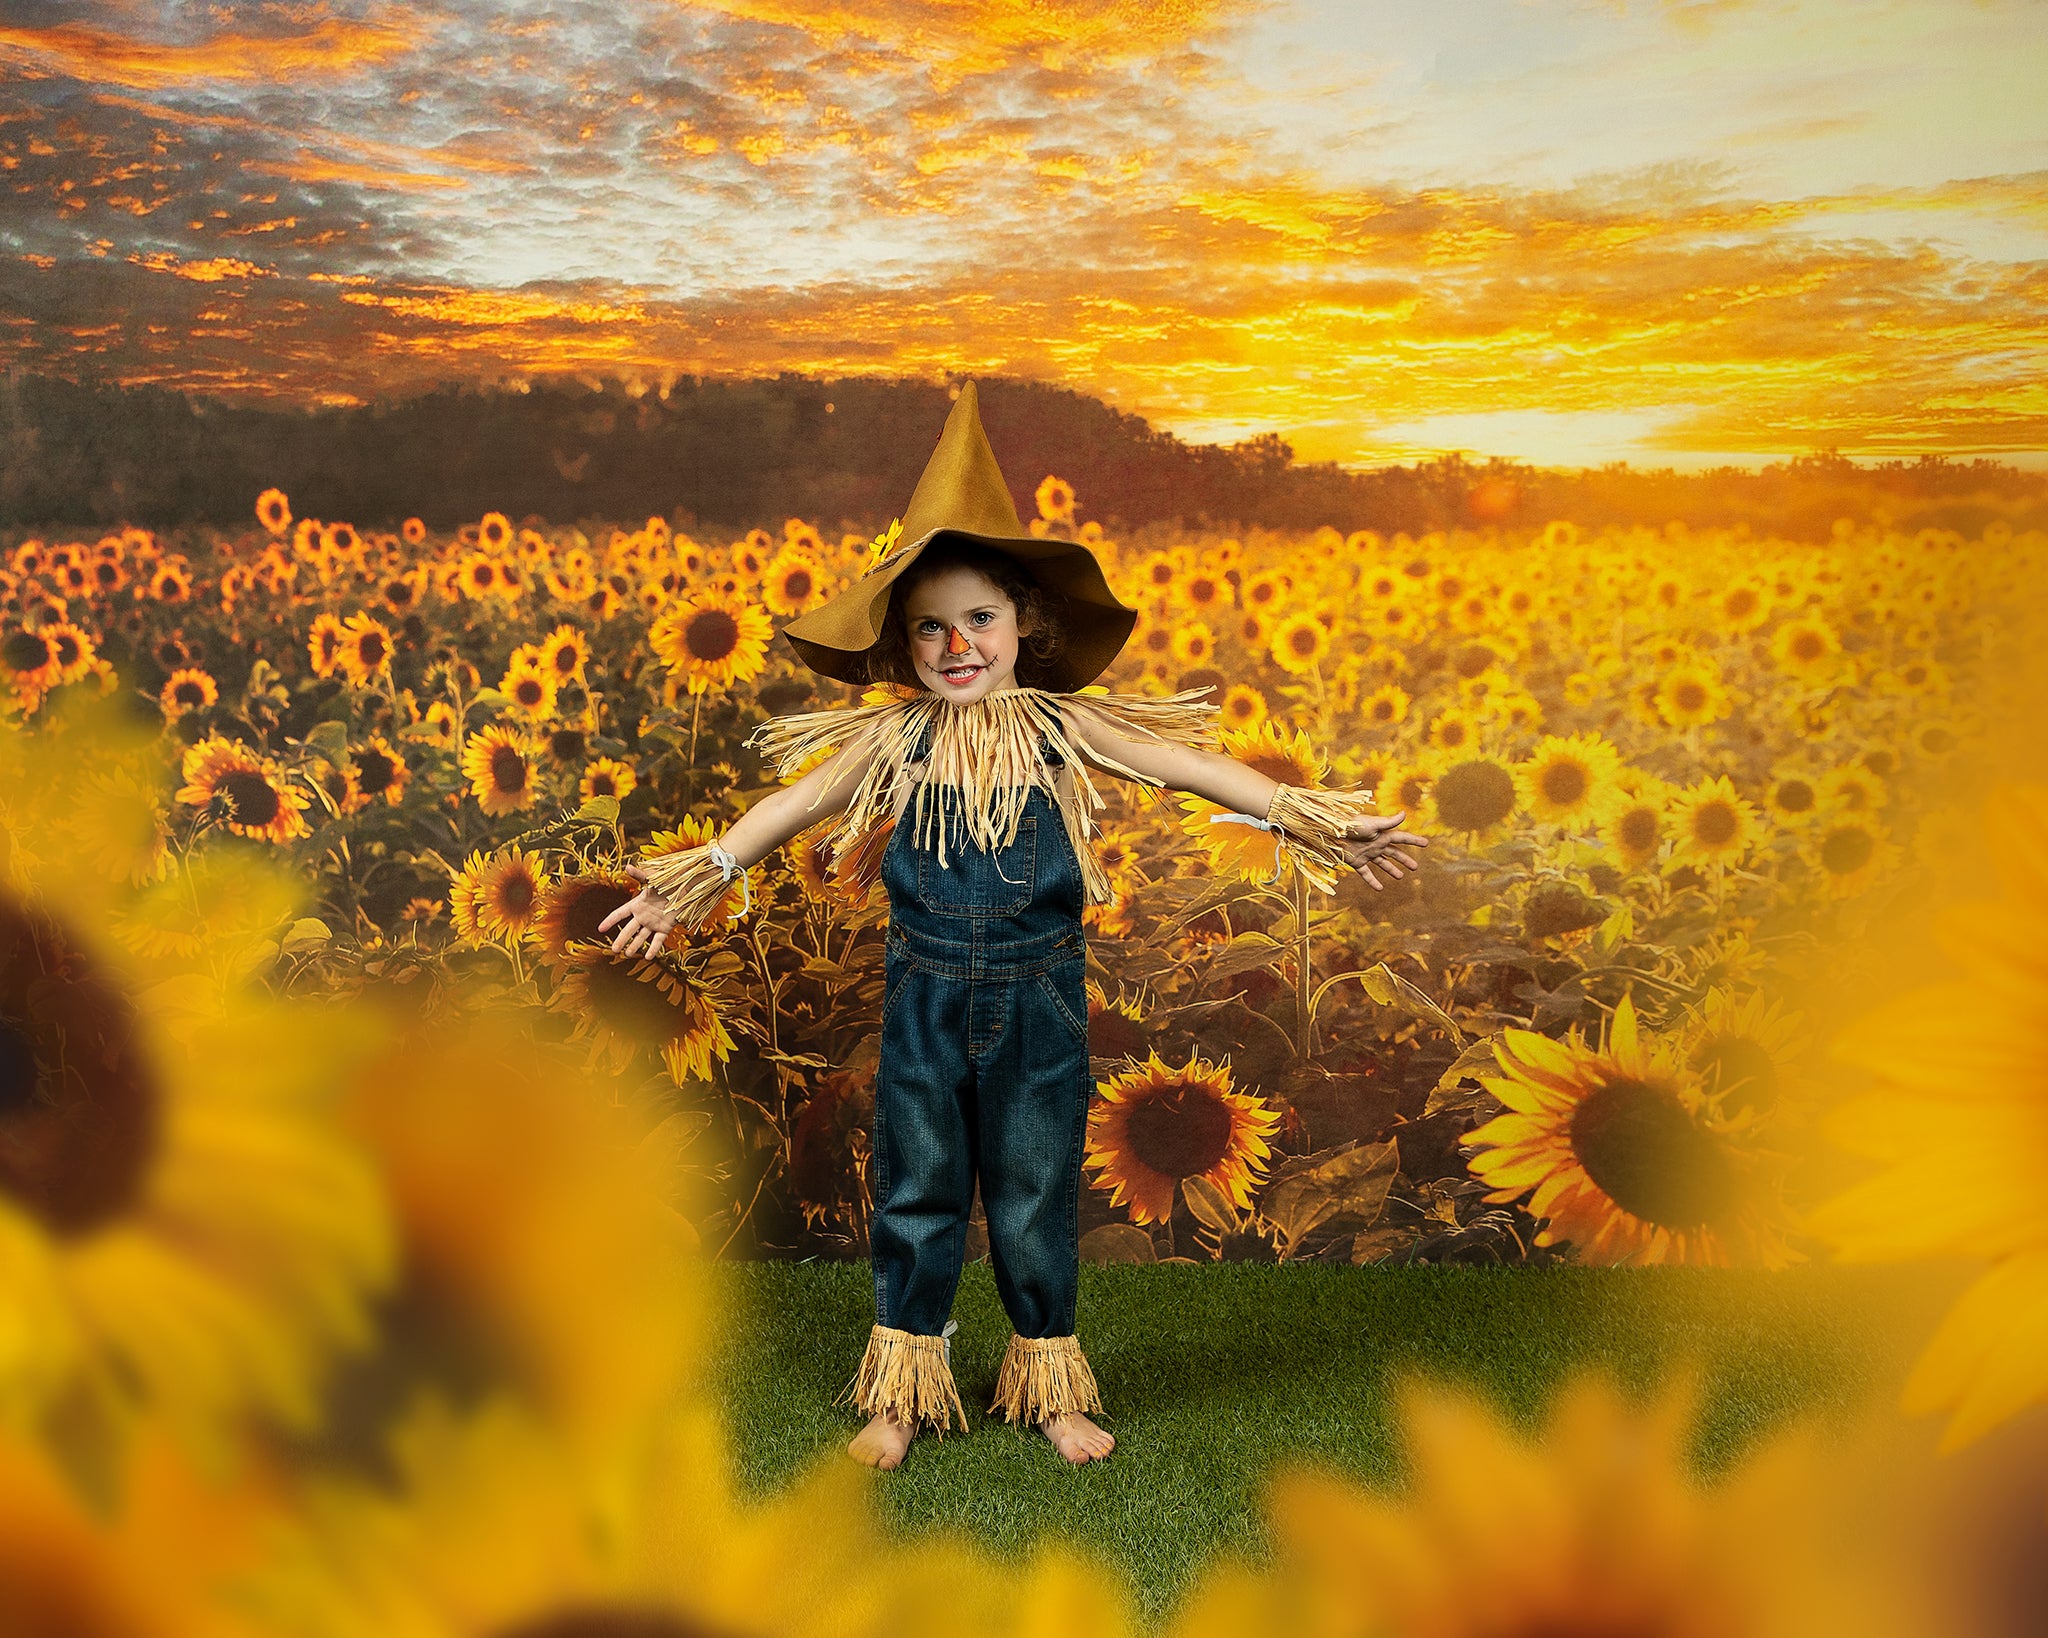 Kate Autumn/Summer Sunflower Field Sunset Backdrop by Chain Photography